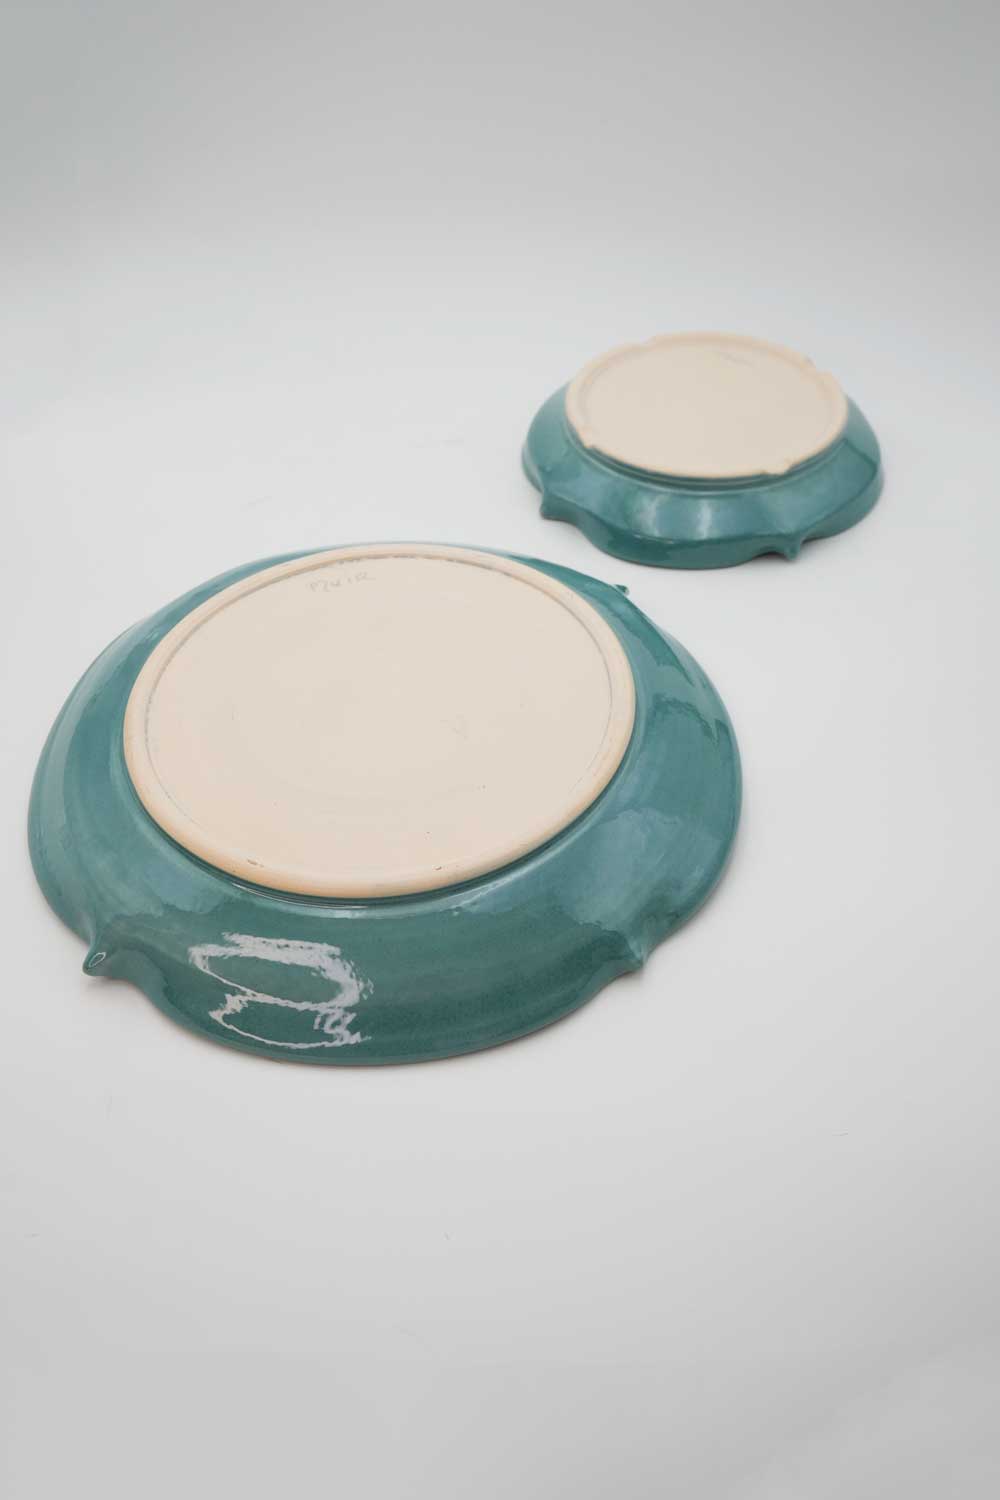 The underside of two handmade ceramic turquoise bowls showing a cream color clay body.